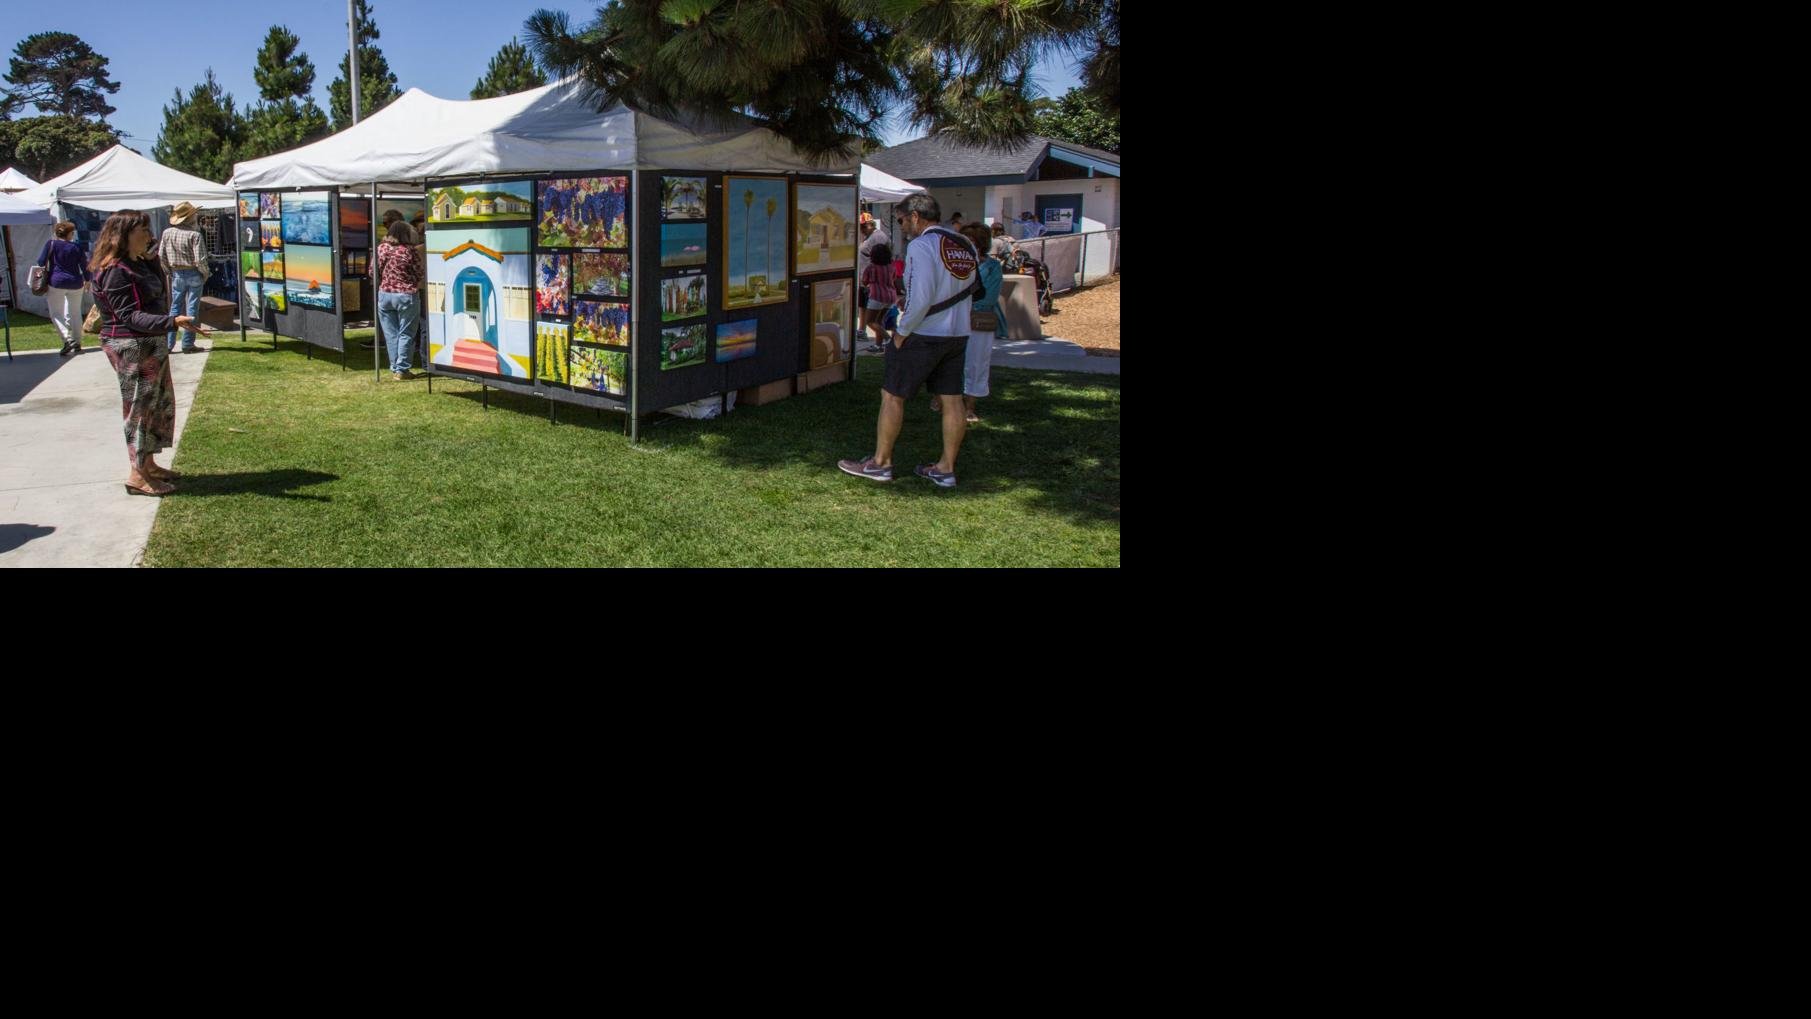 Art in the Park Morro Bay festival offers artists, handmade crafts